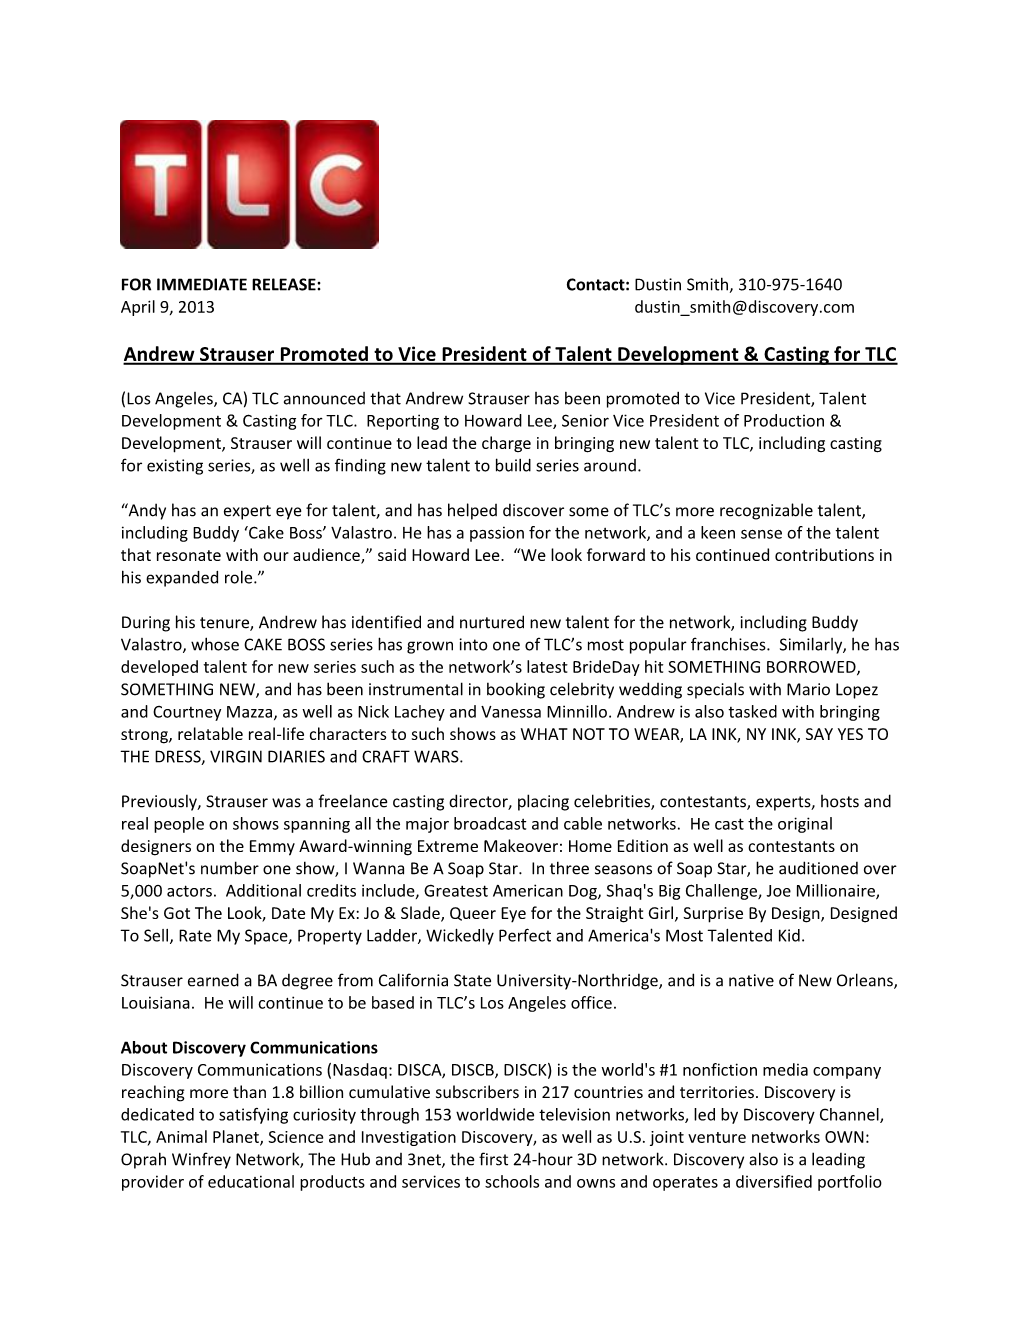 Andrew Strauser Promoted to Vice President of Talent Development & Casting for TLC